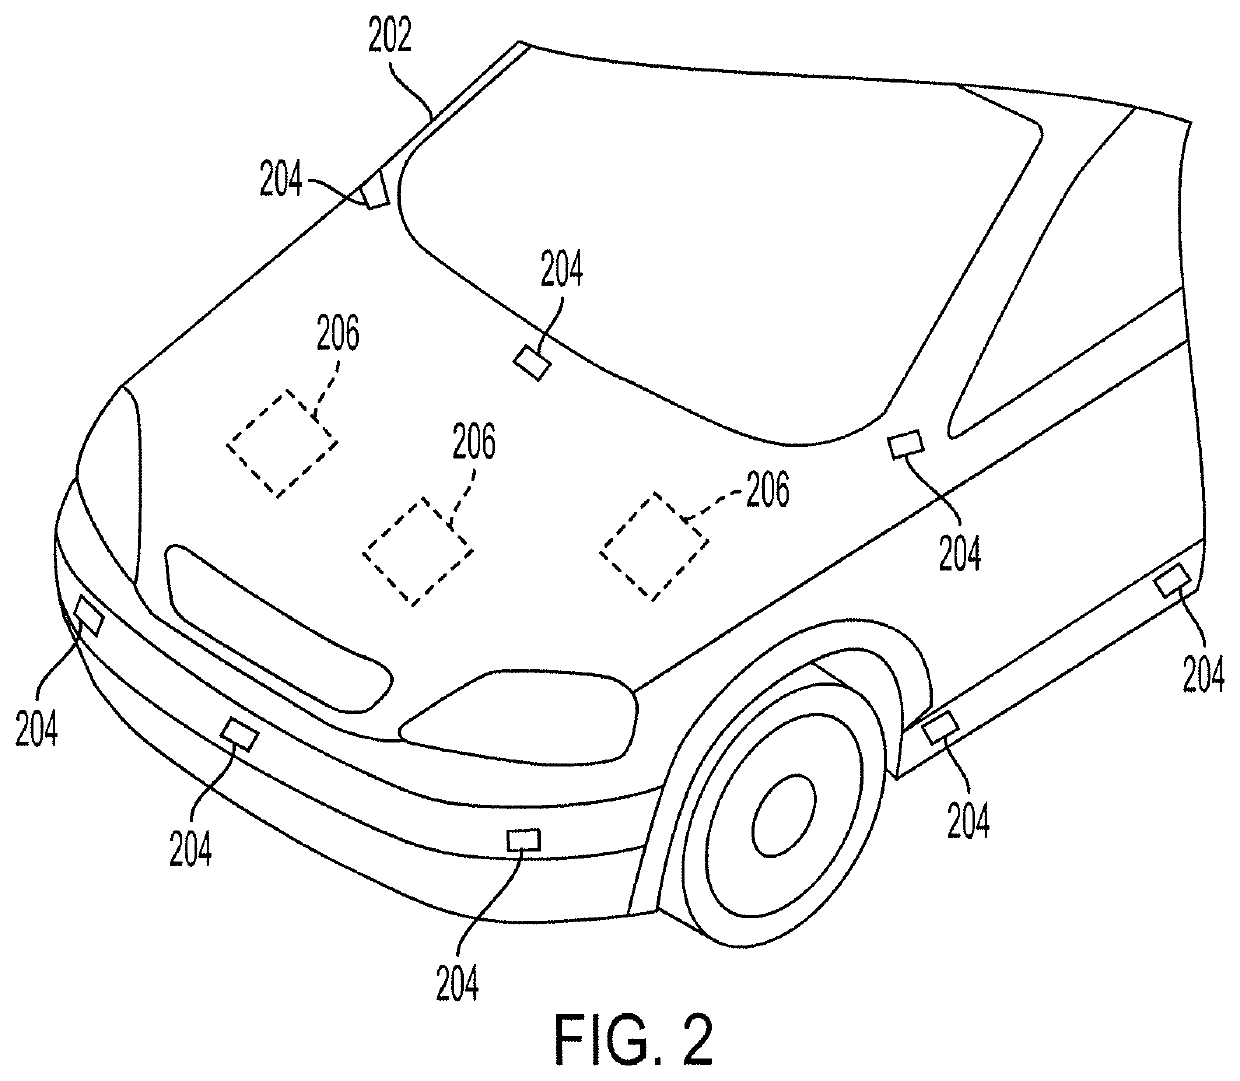 Vehicle recommendation system using sensors